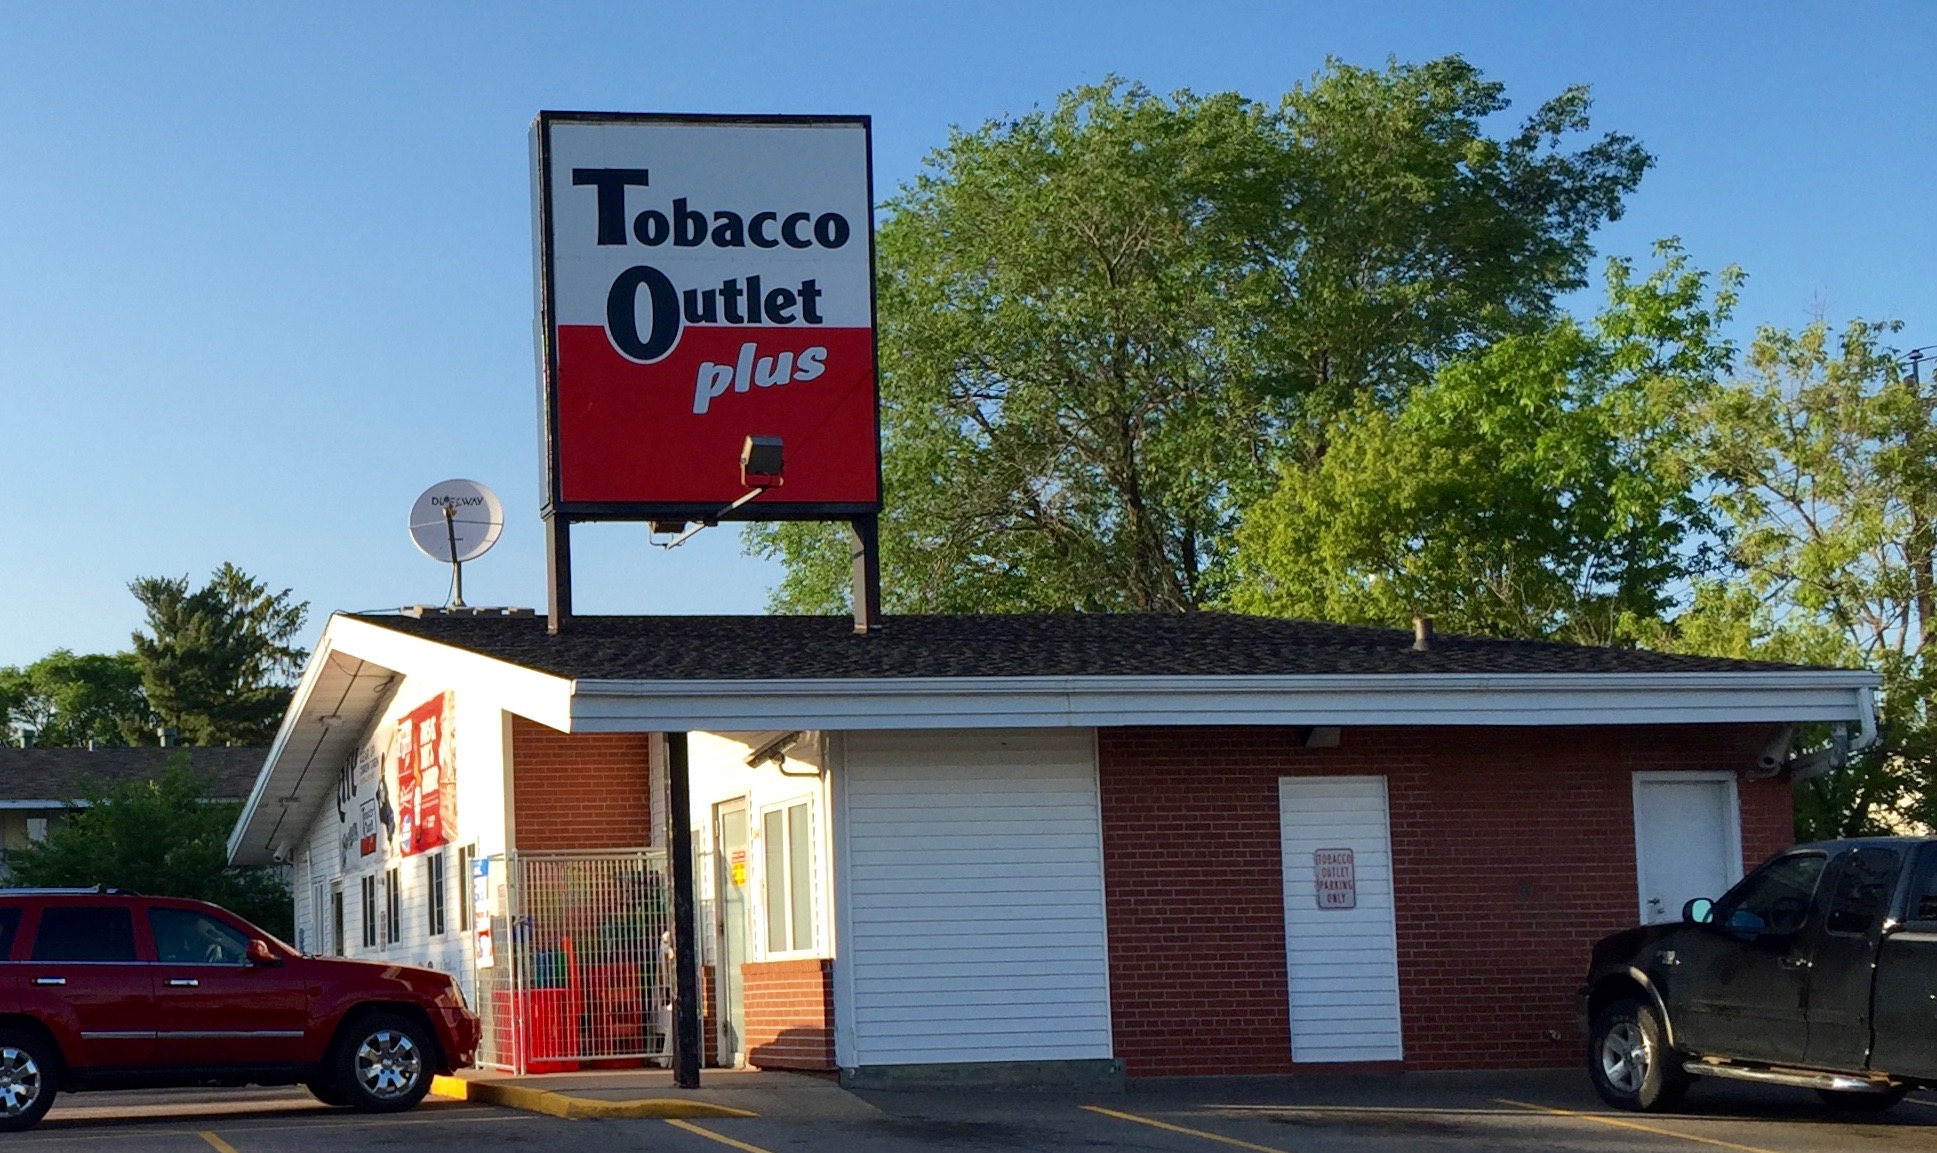 Tobacco Outlet Plus #559